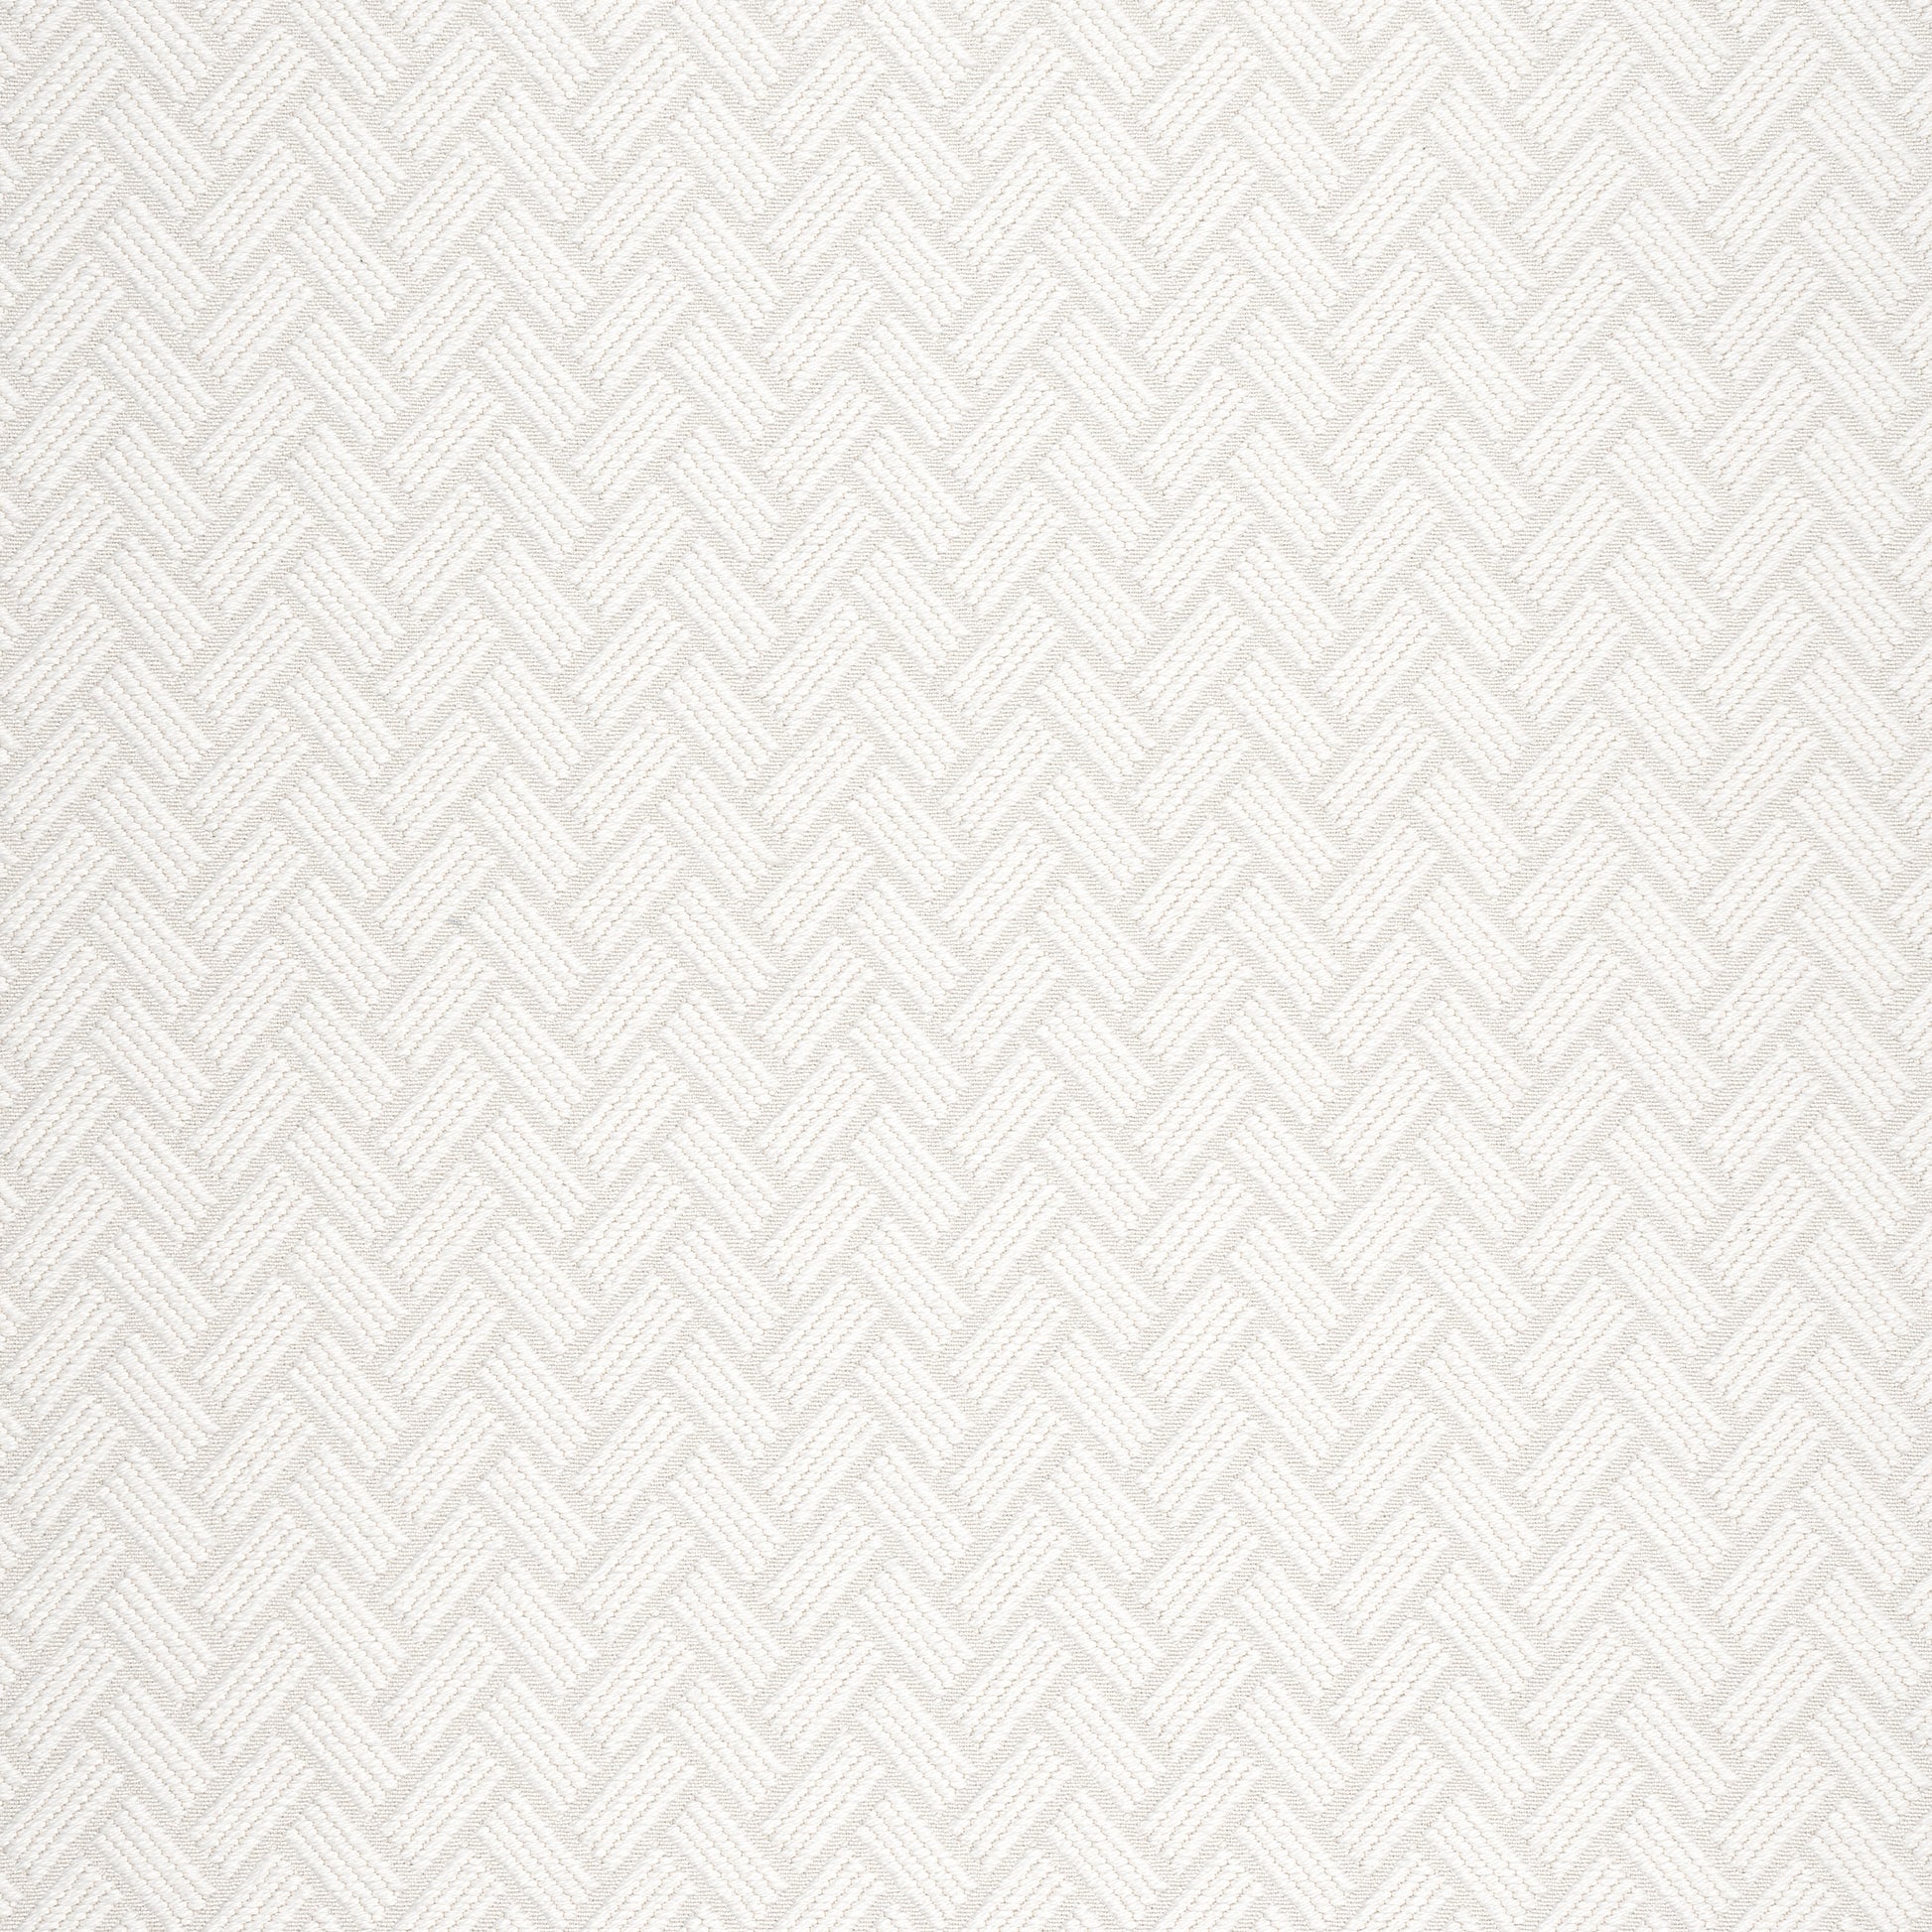 Purchase Thibaut Fabric SKU W74220 pattern name Cobblegrey color Ivory